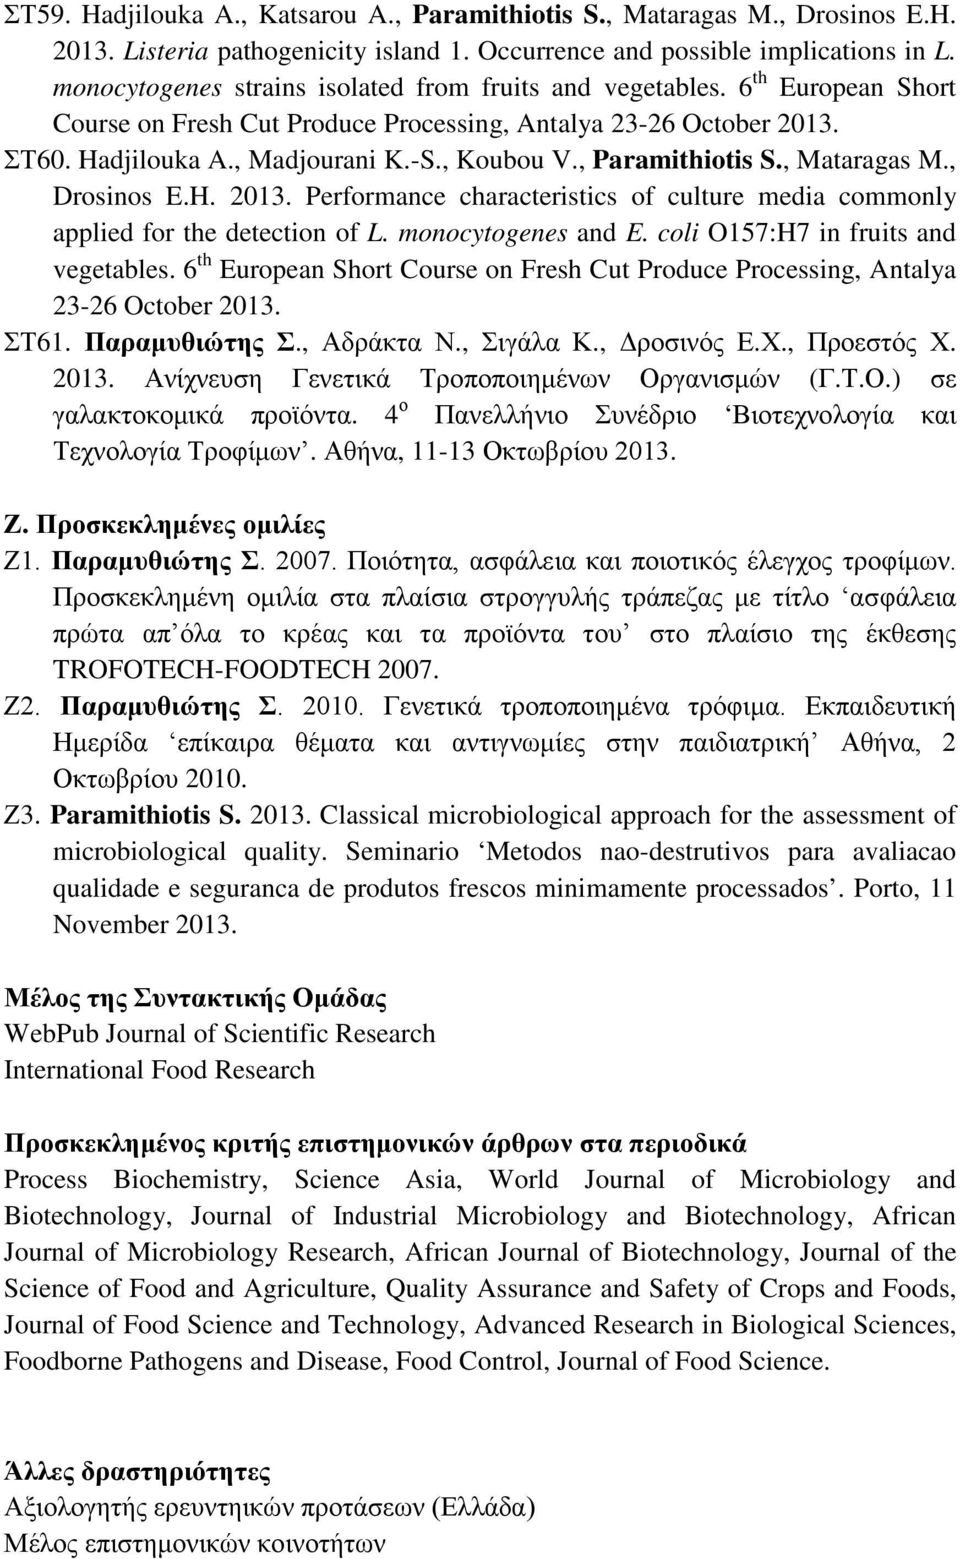 , Paramithiotis S., Mataragas M., Drosinos E.H. 2013. Performance characteristics of culture media commonly applied for the detection of L. monocytogenes and E. coli O157:H7 in fruits and vegetables.